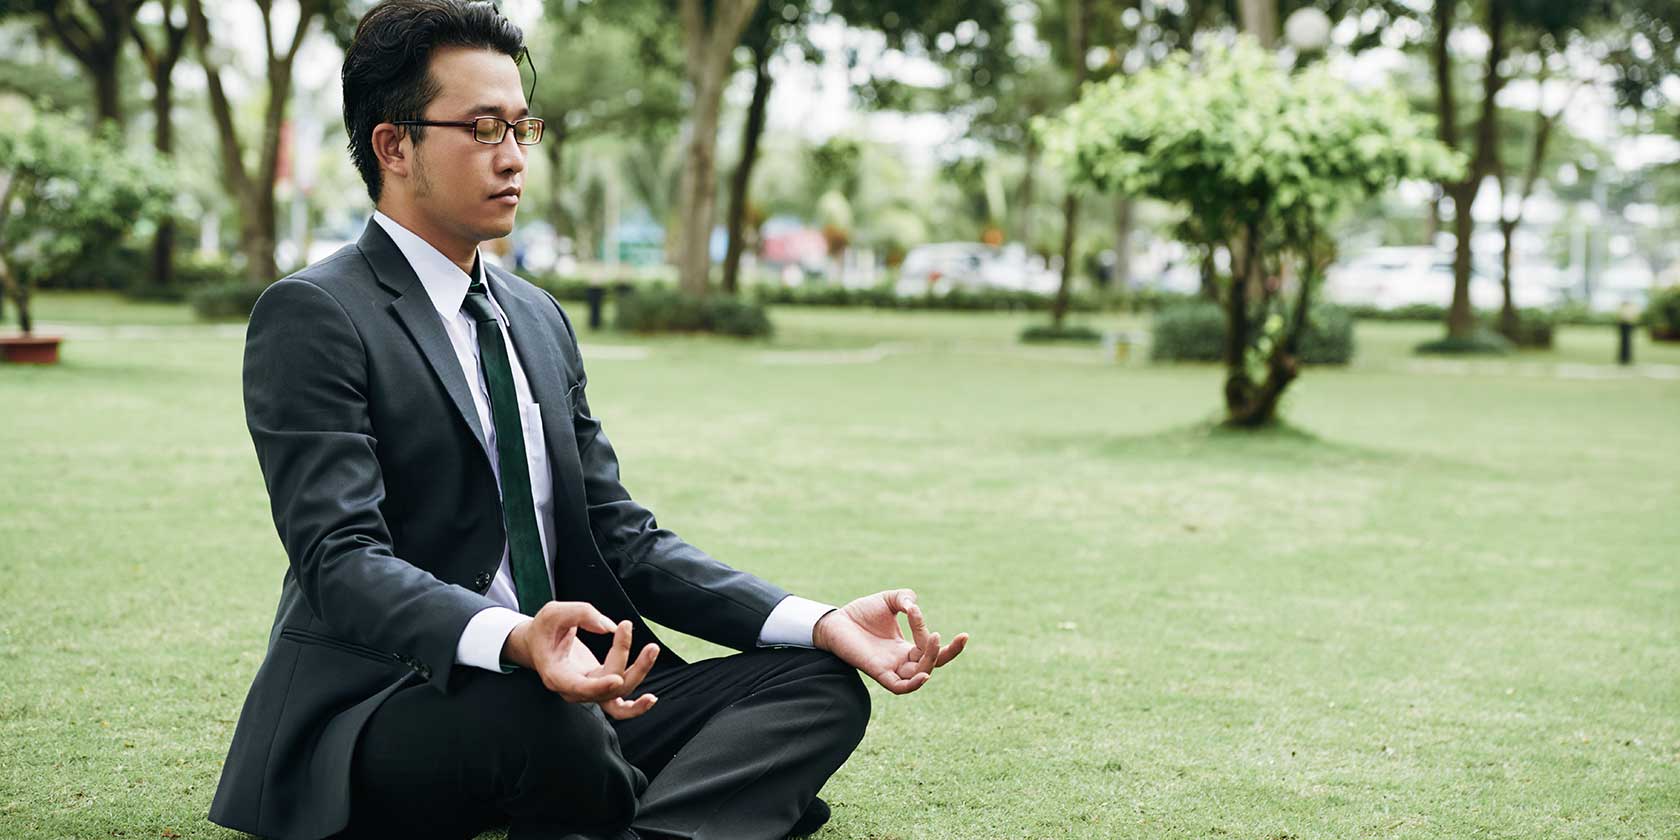 MEDITATION: BY LAWYERS & FOR LAWYERS